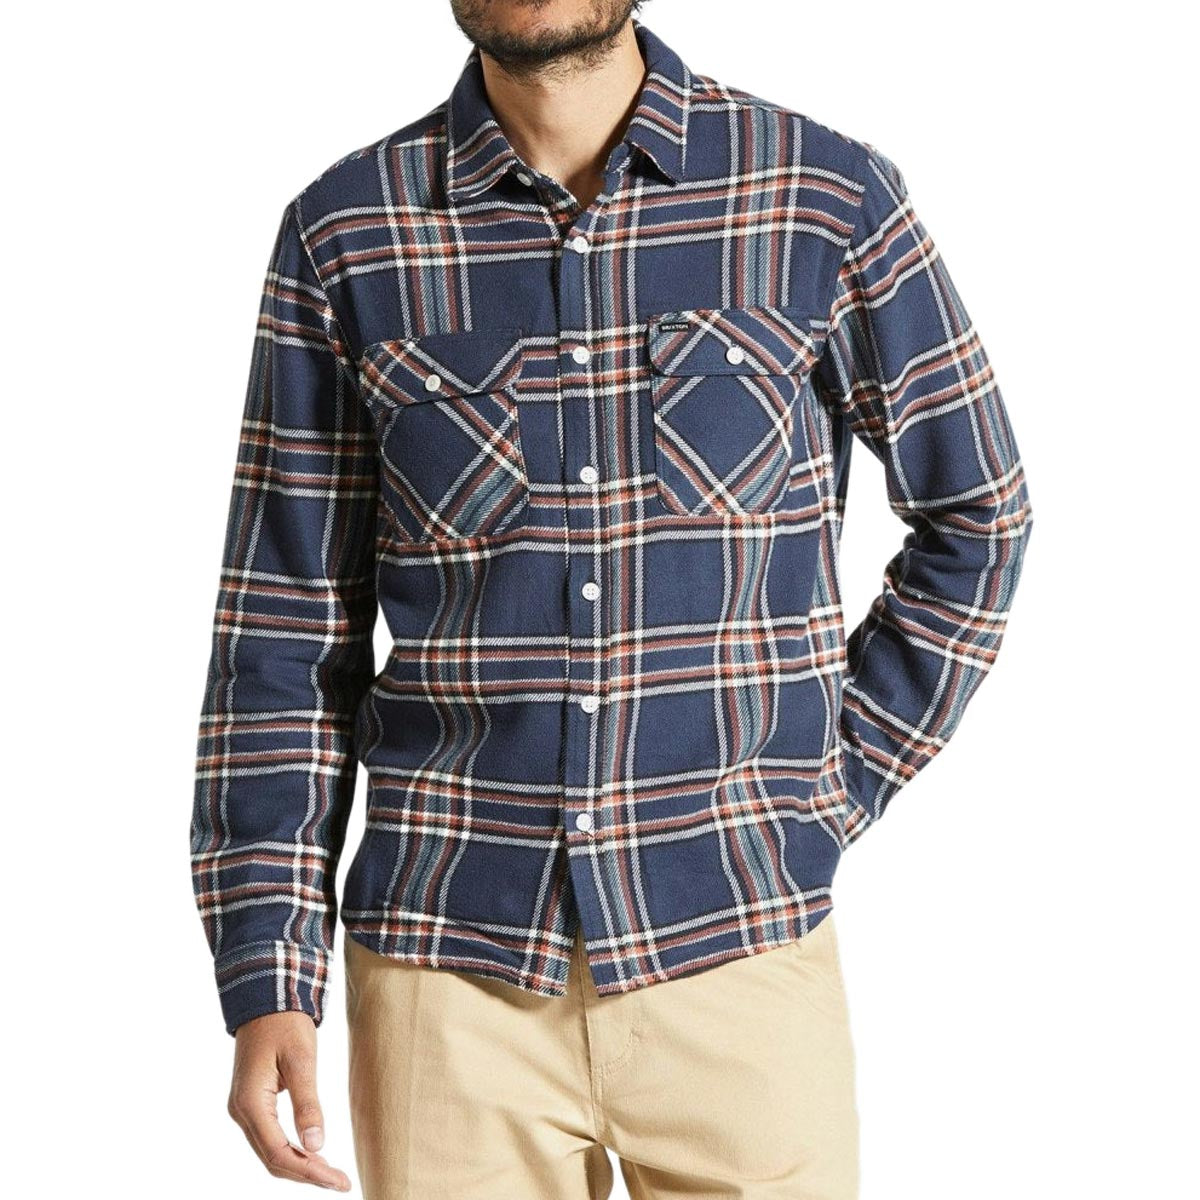 Brixton Bowery Flannel Long Sleeve Shirt - Washed Navy/Off White/Terracot image 1